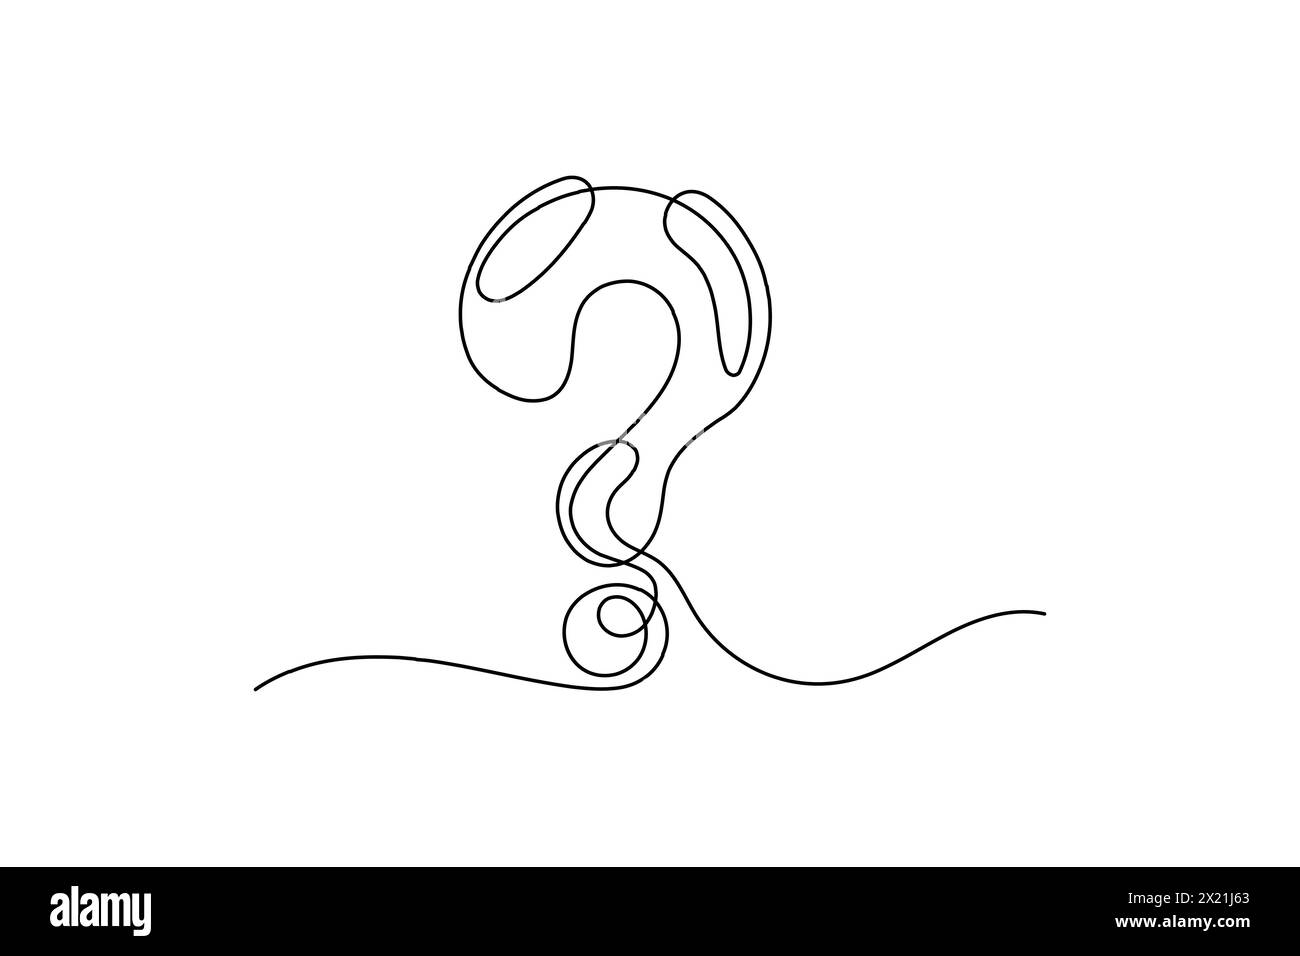 Question mark continuous line one line drawing isolated on white background. Vector illustration. Question mark cartoon Stock Vector